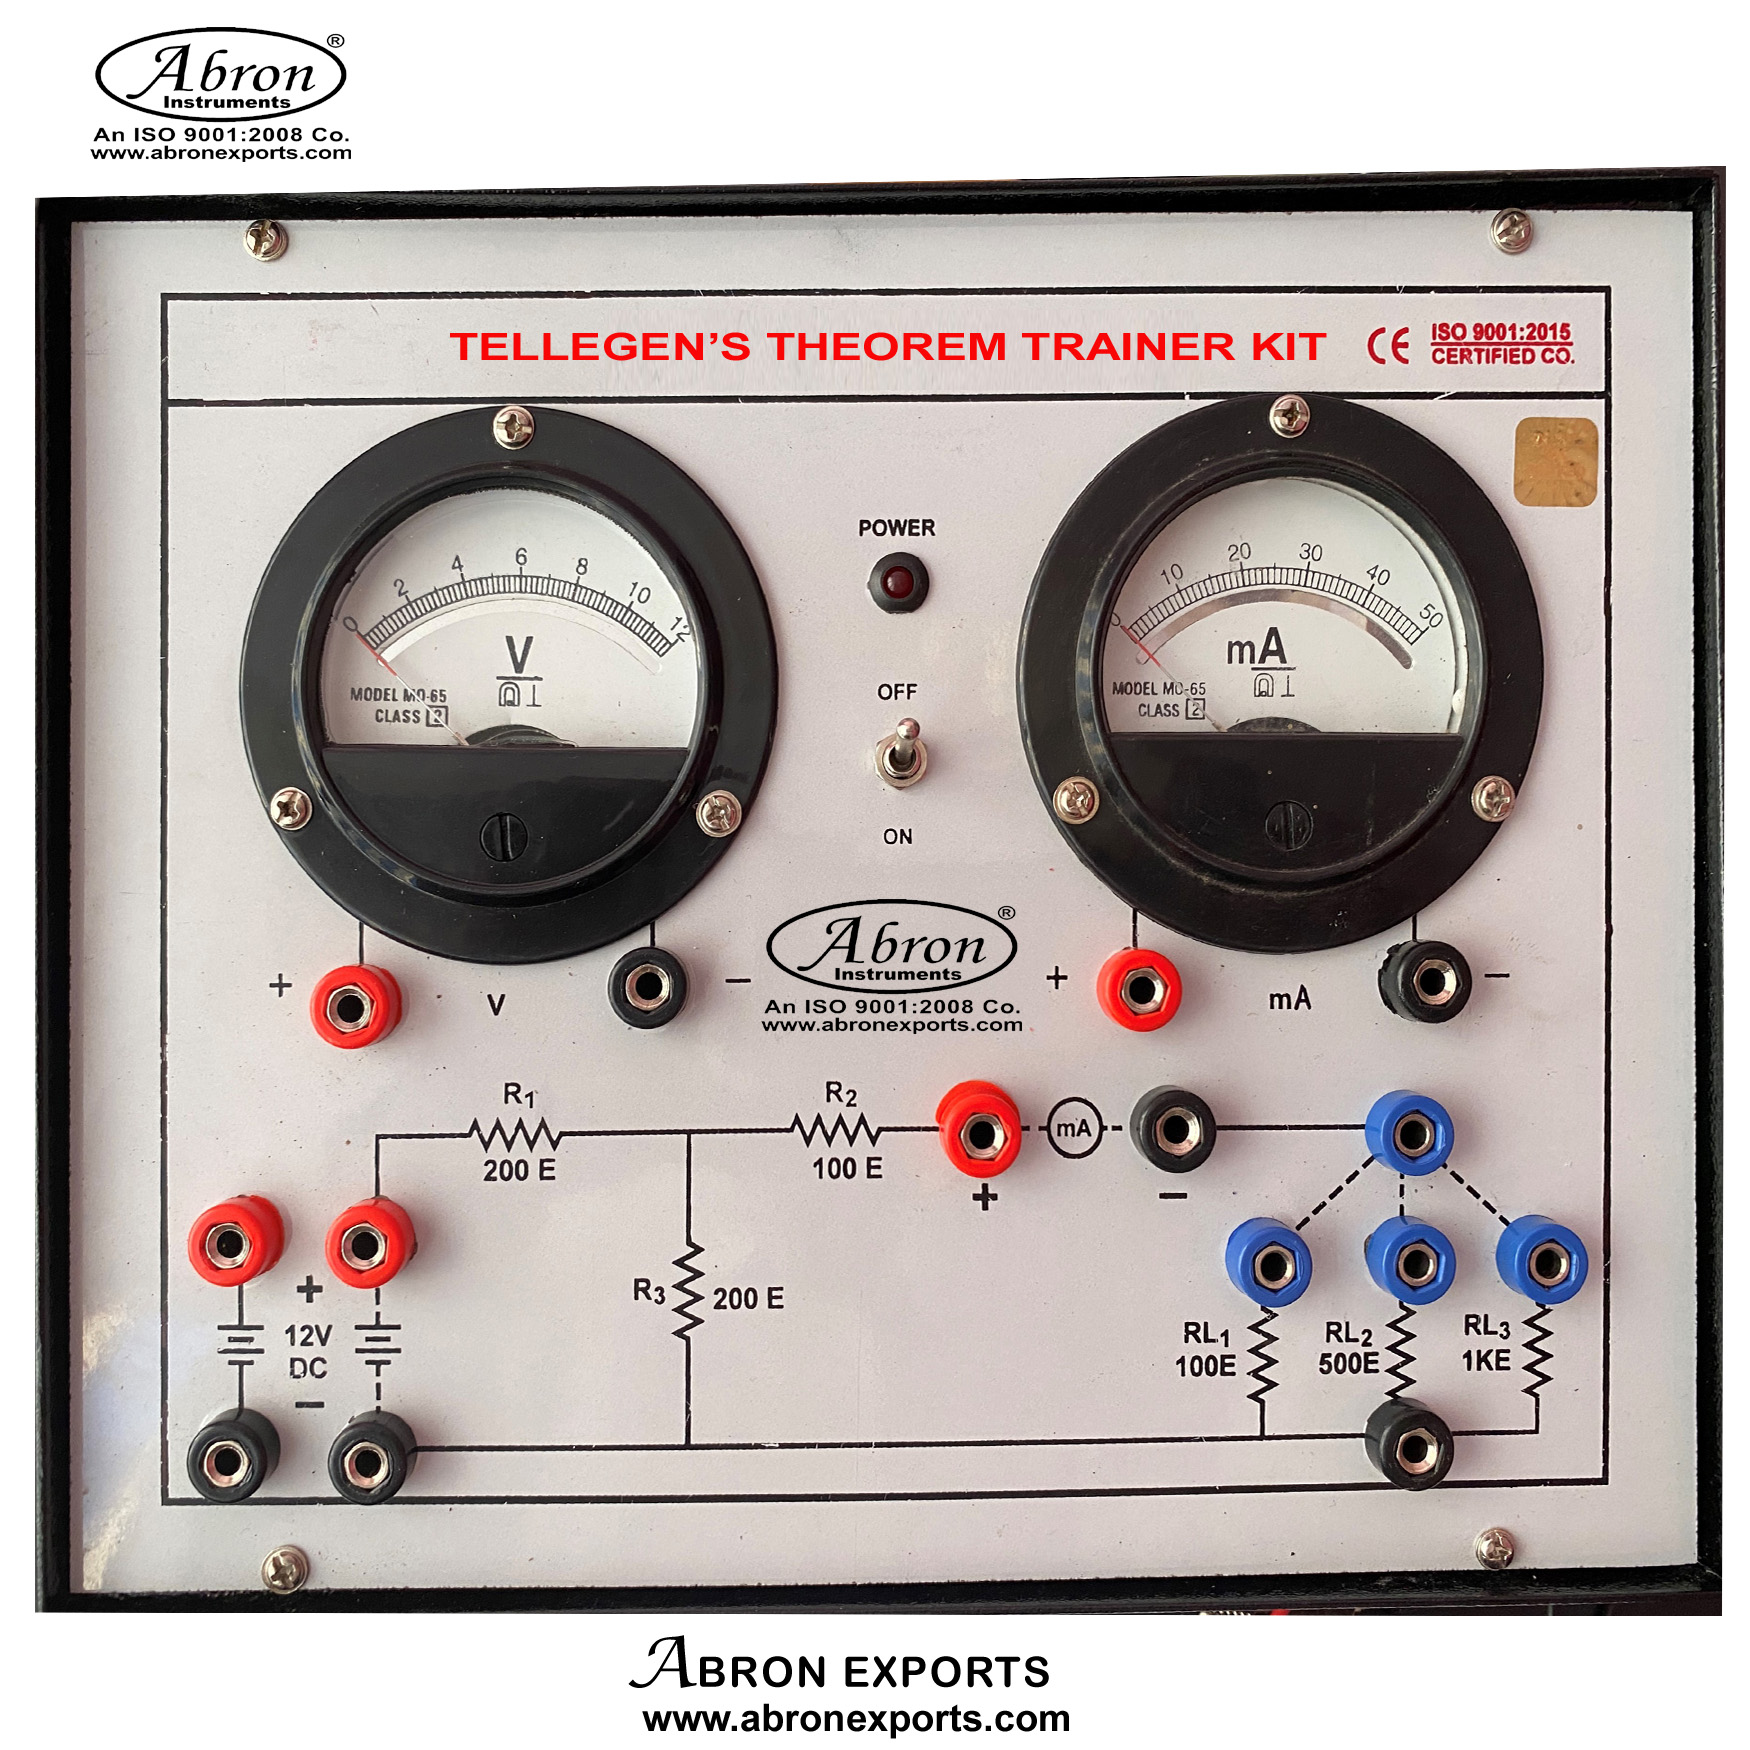 Study Theorem Tellegen Theorem With Power Supply 2 Meters Electronic Trainer Kit Abron AE-1430TG 